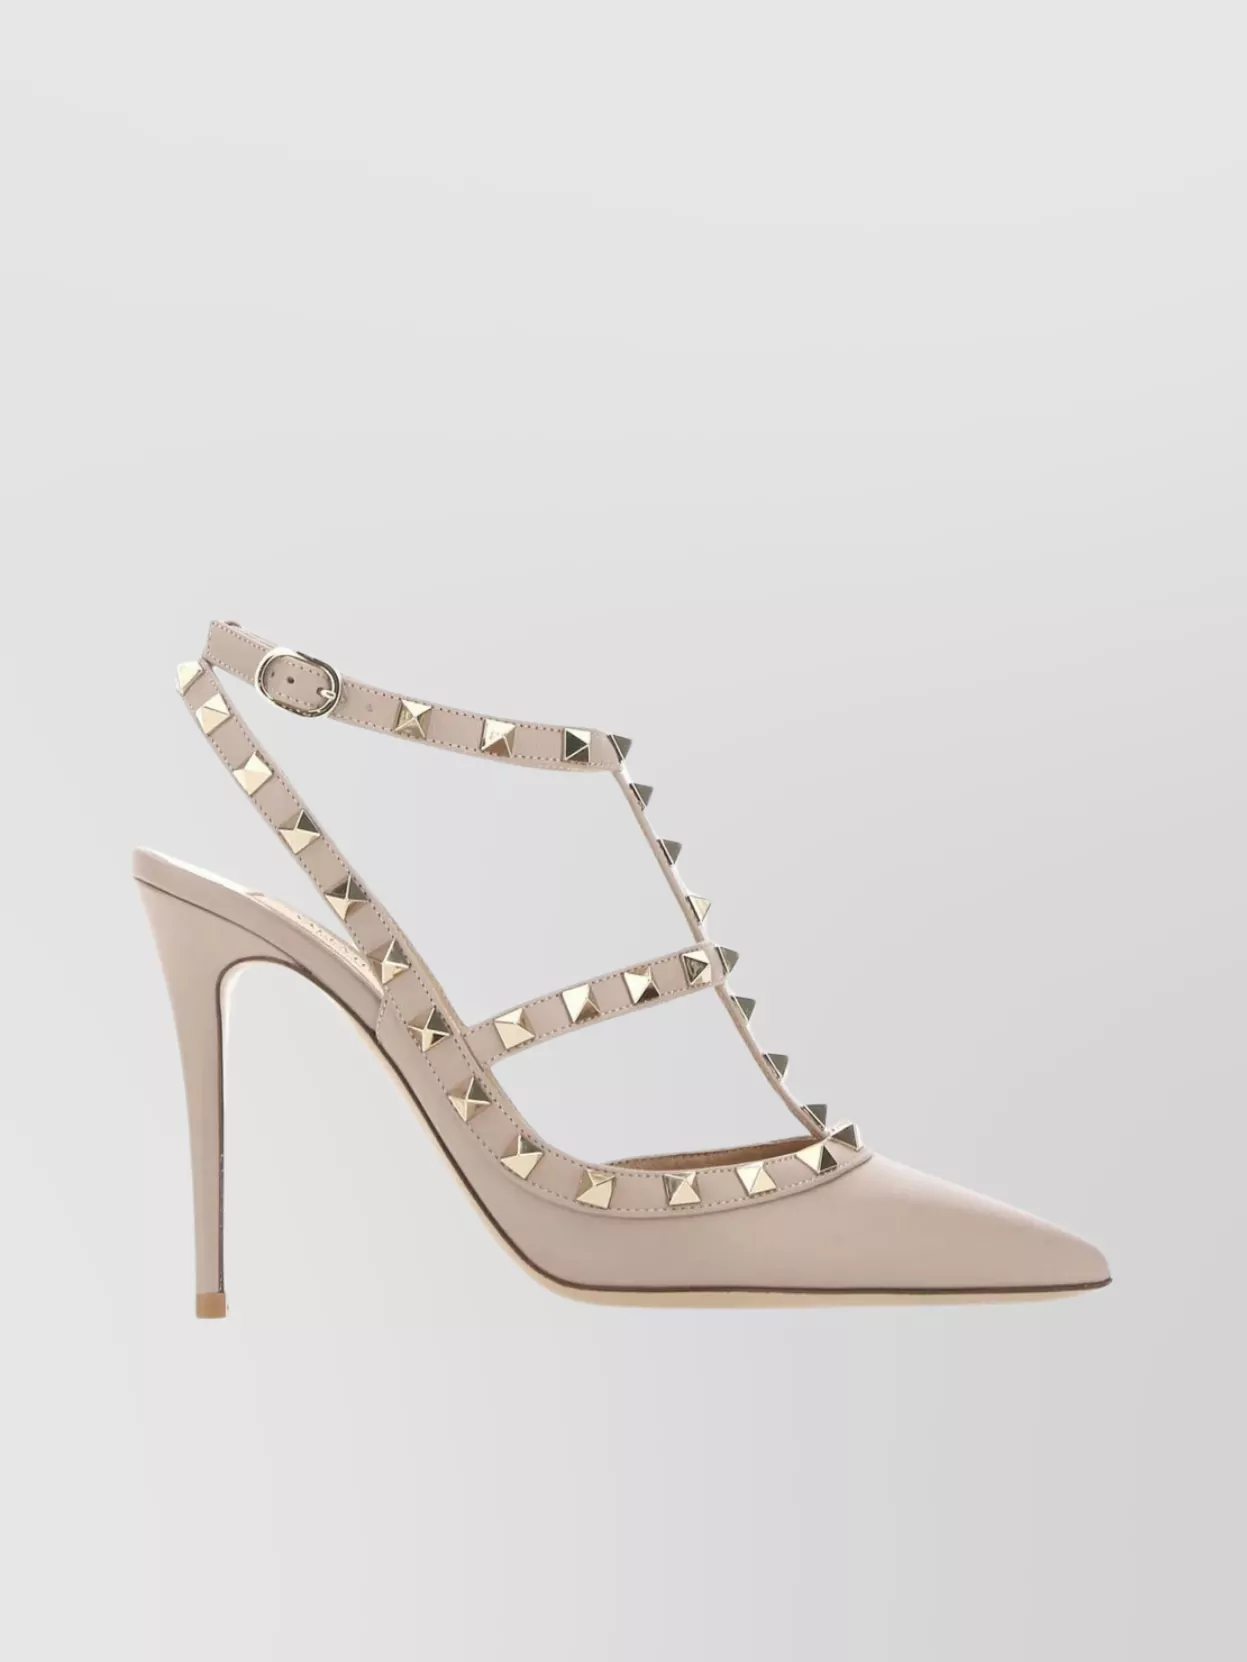 Shop Valentino Leather Pumps With Pointed Toe And Stiletto Heel